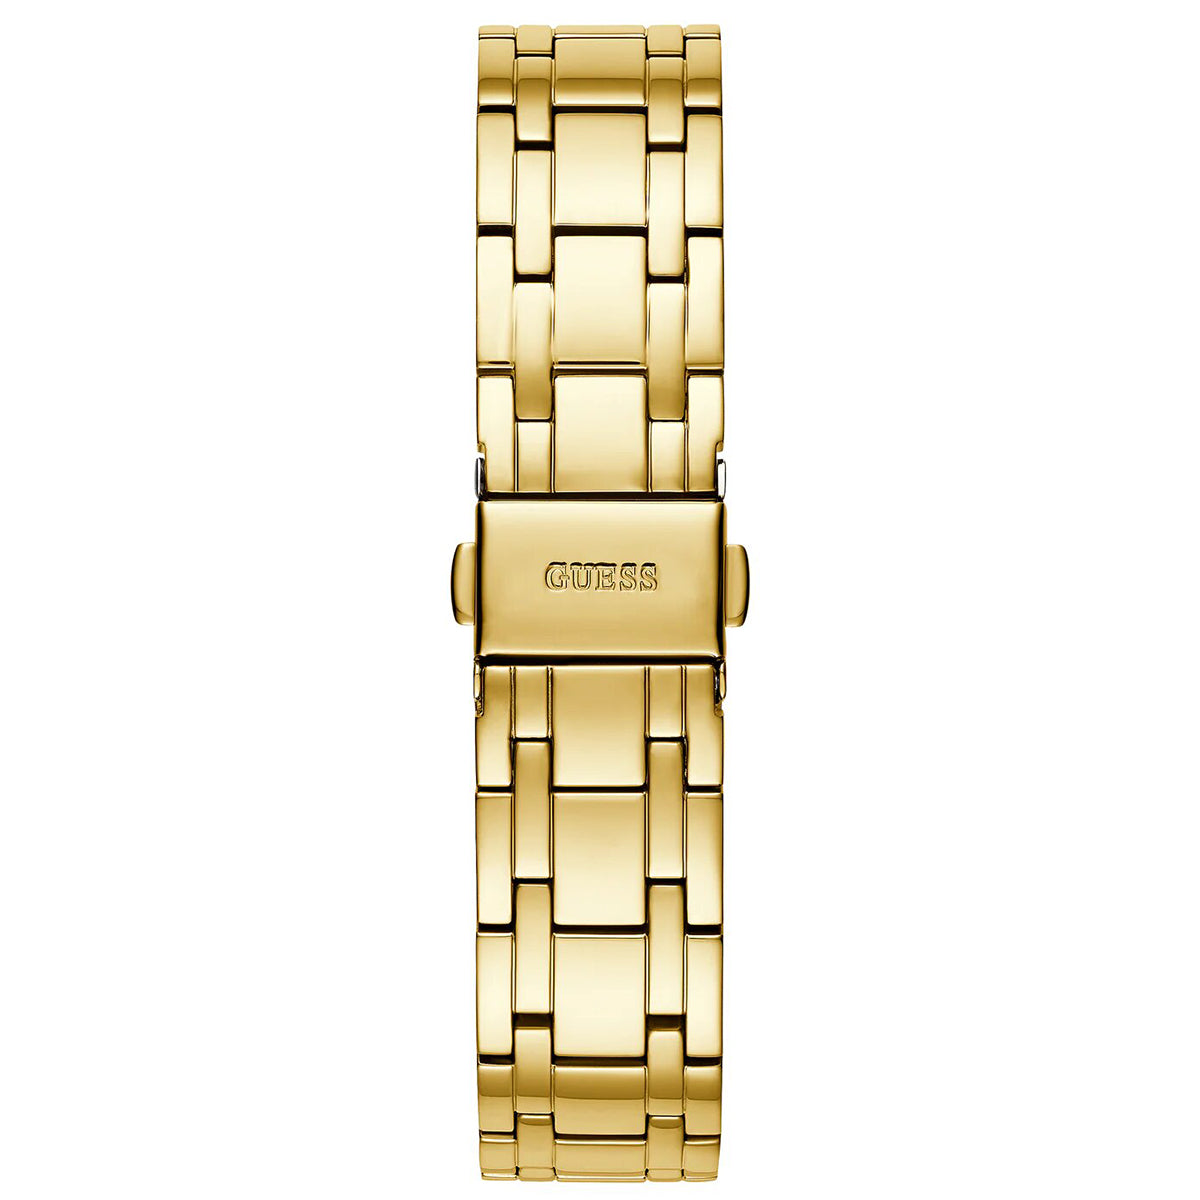 Stainless gold tone Guess women watch with sparkling crystal